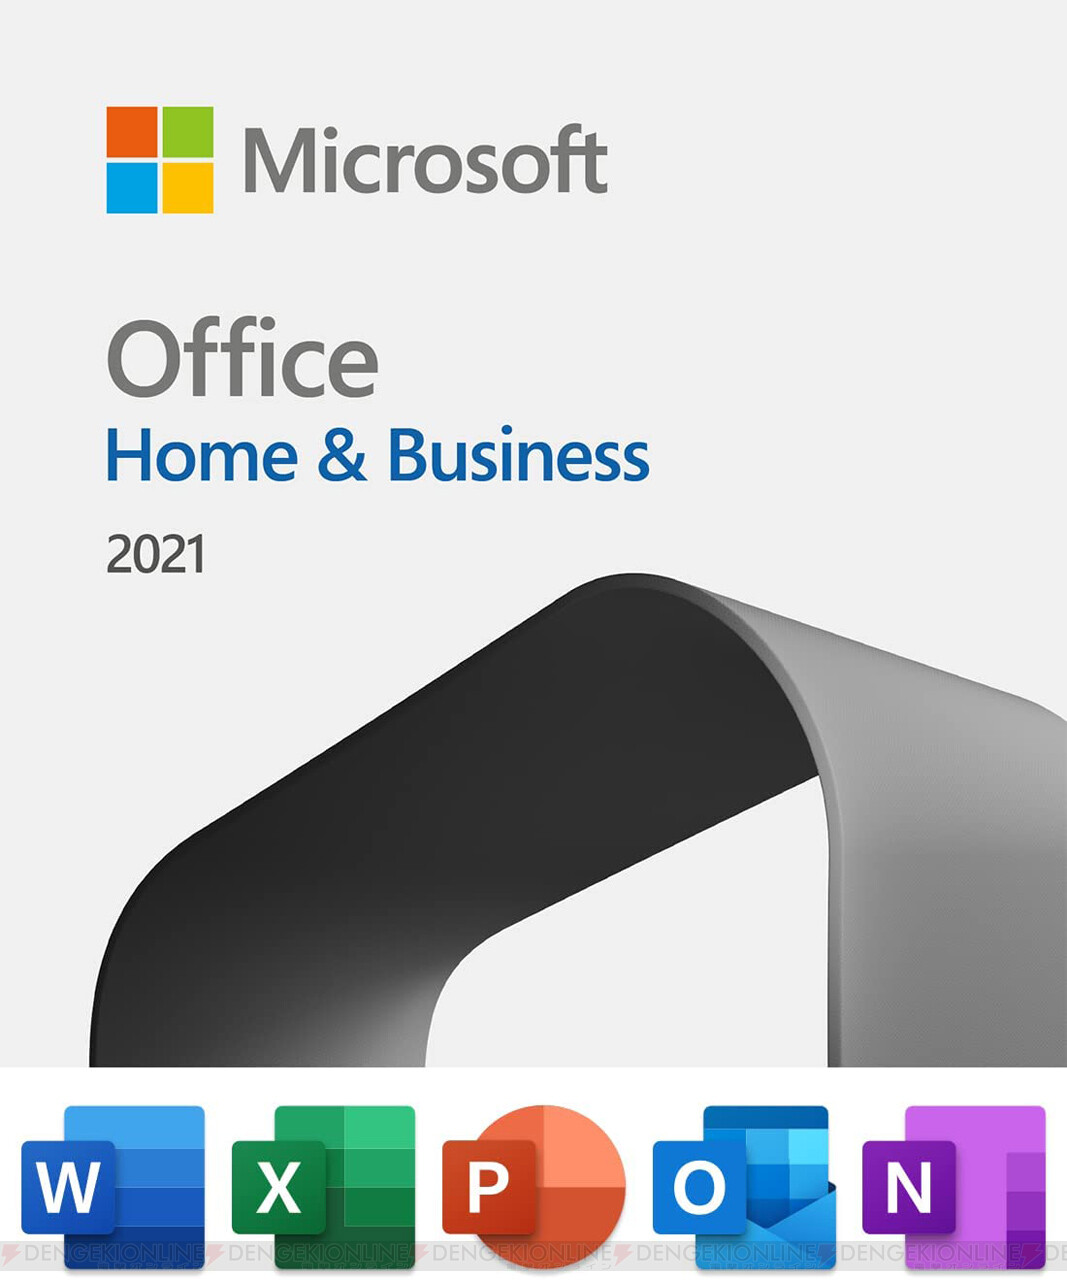 ★ Microsoft Office Home＆Business 2021